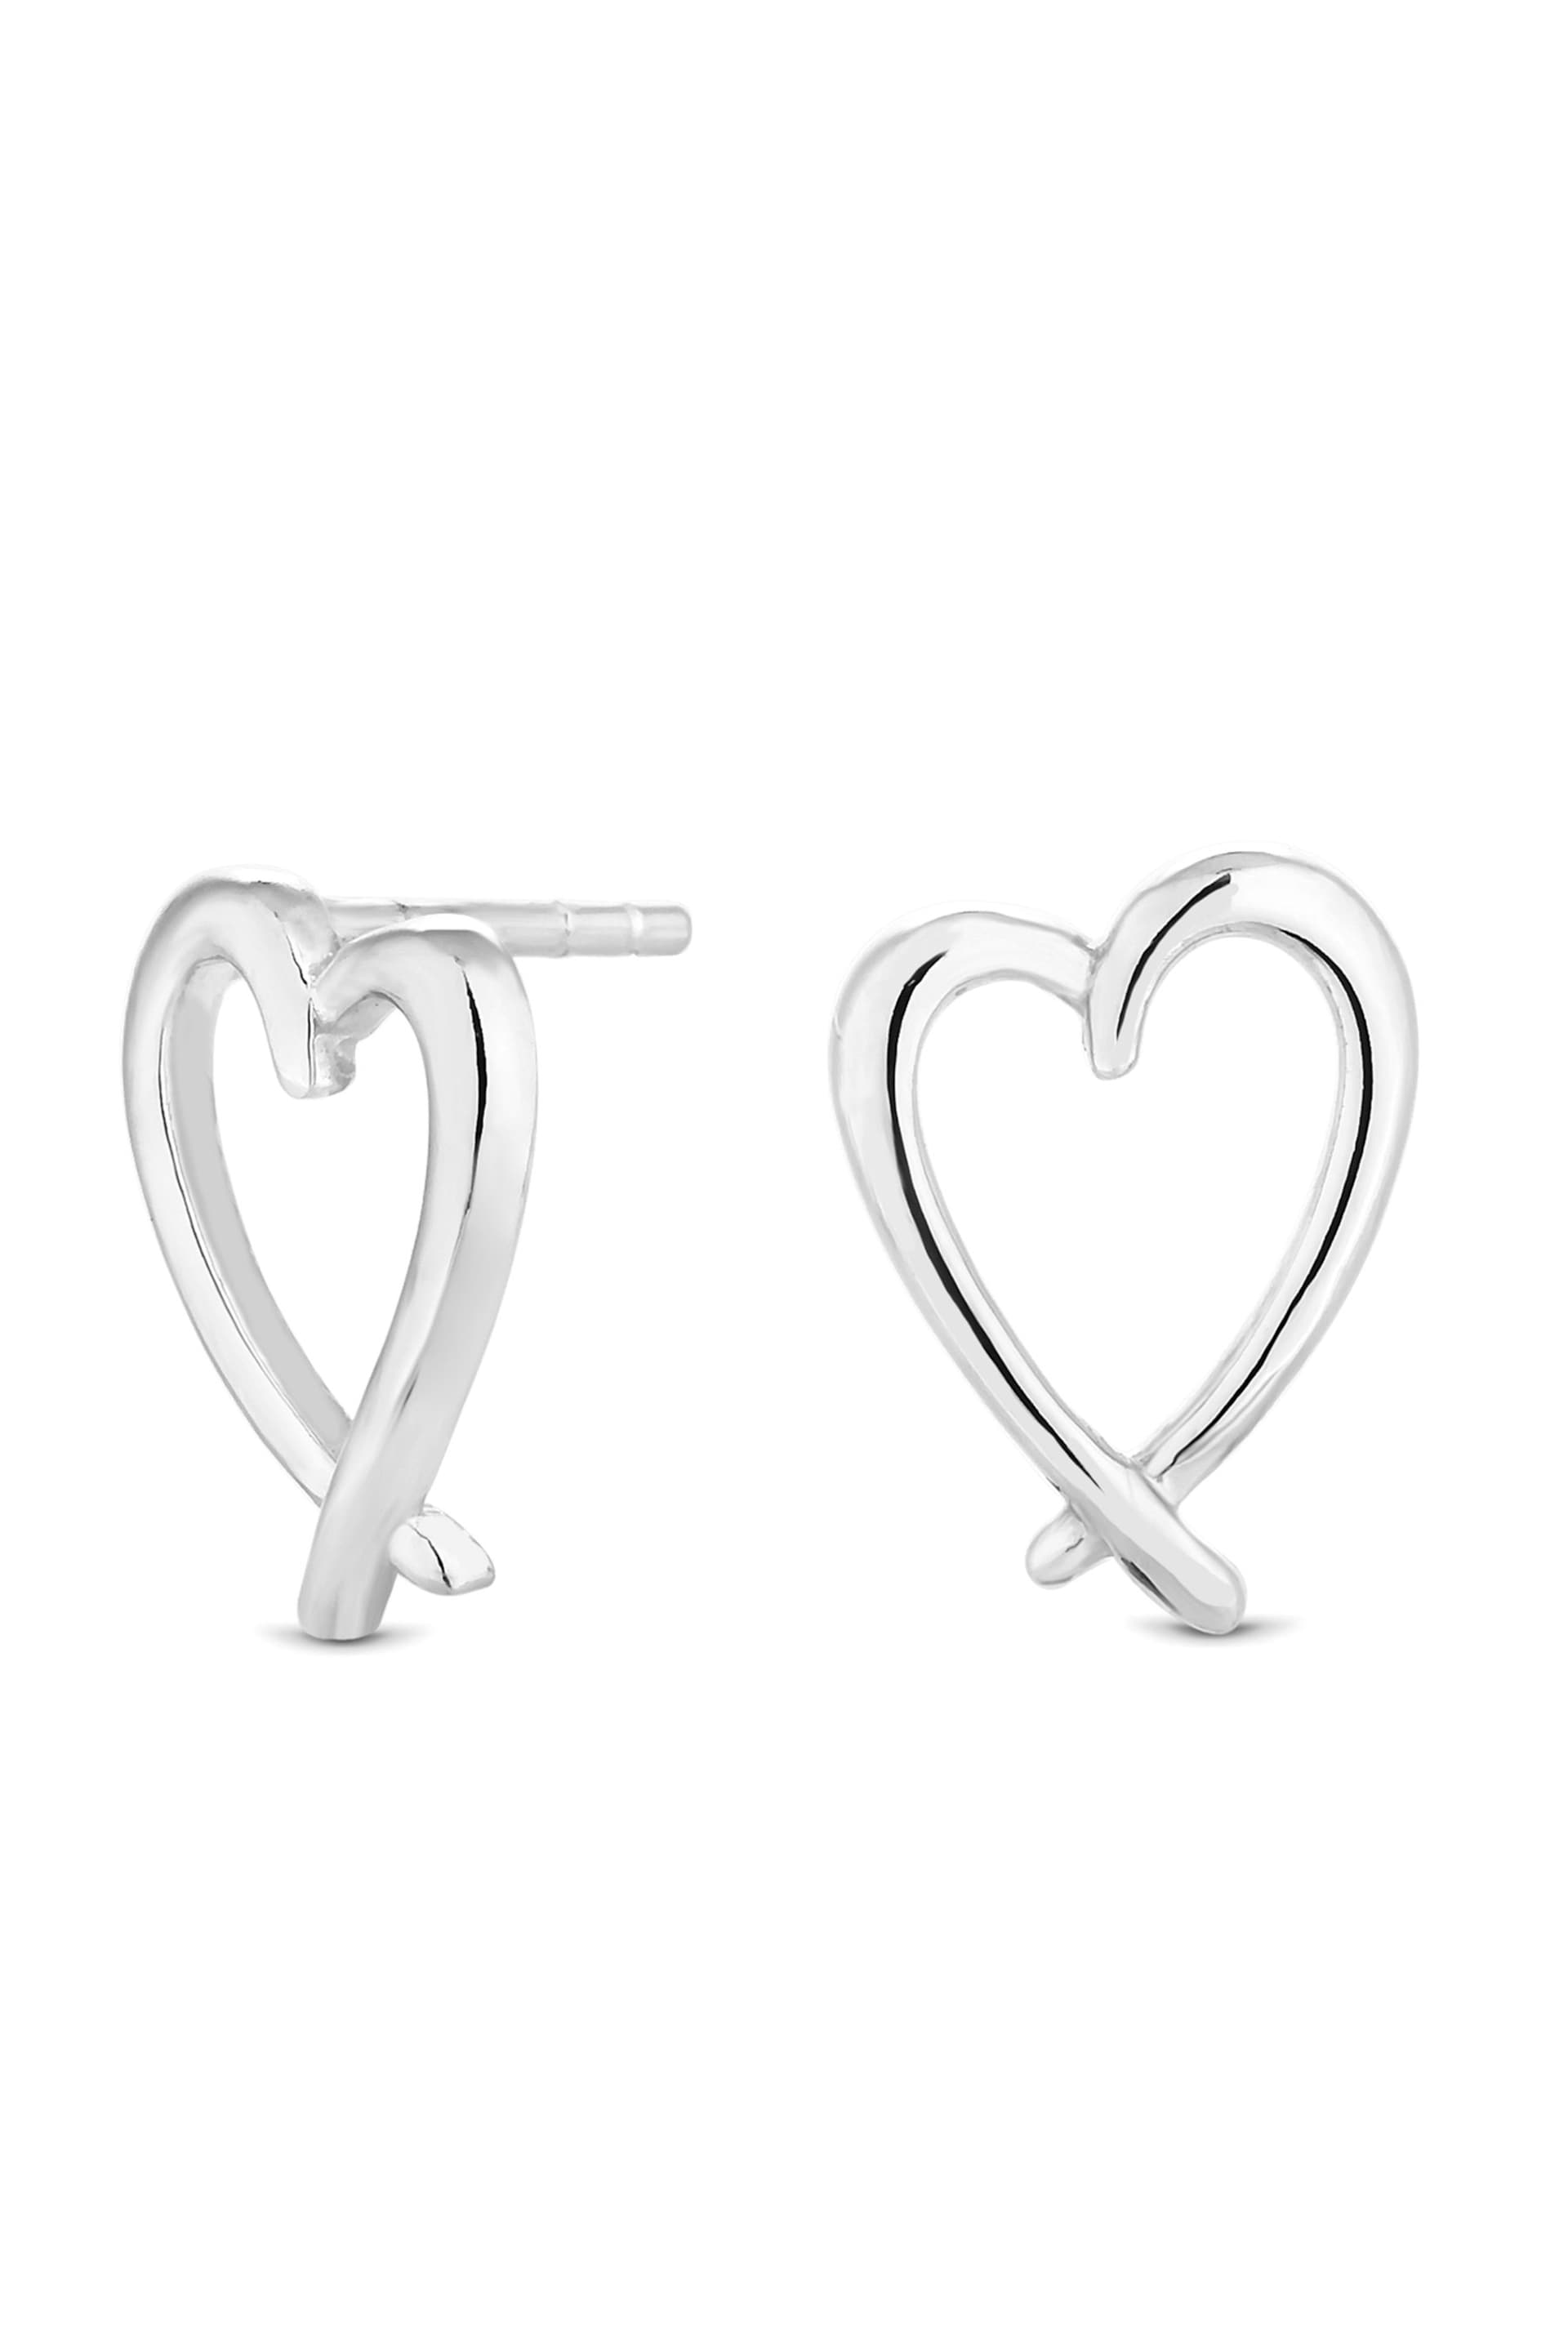 Simply Silver Sterling Silver Tone 925 Open Crossover Heart Stud Earrings - Image 1 of 2